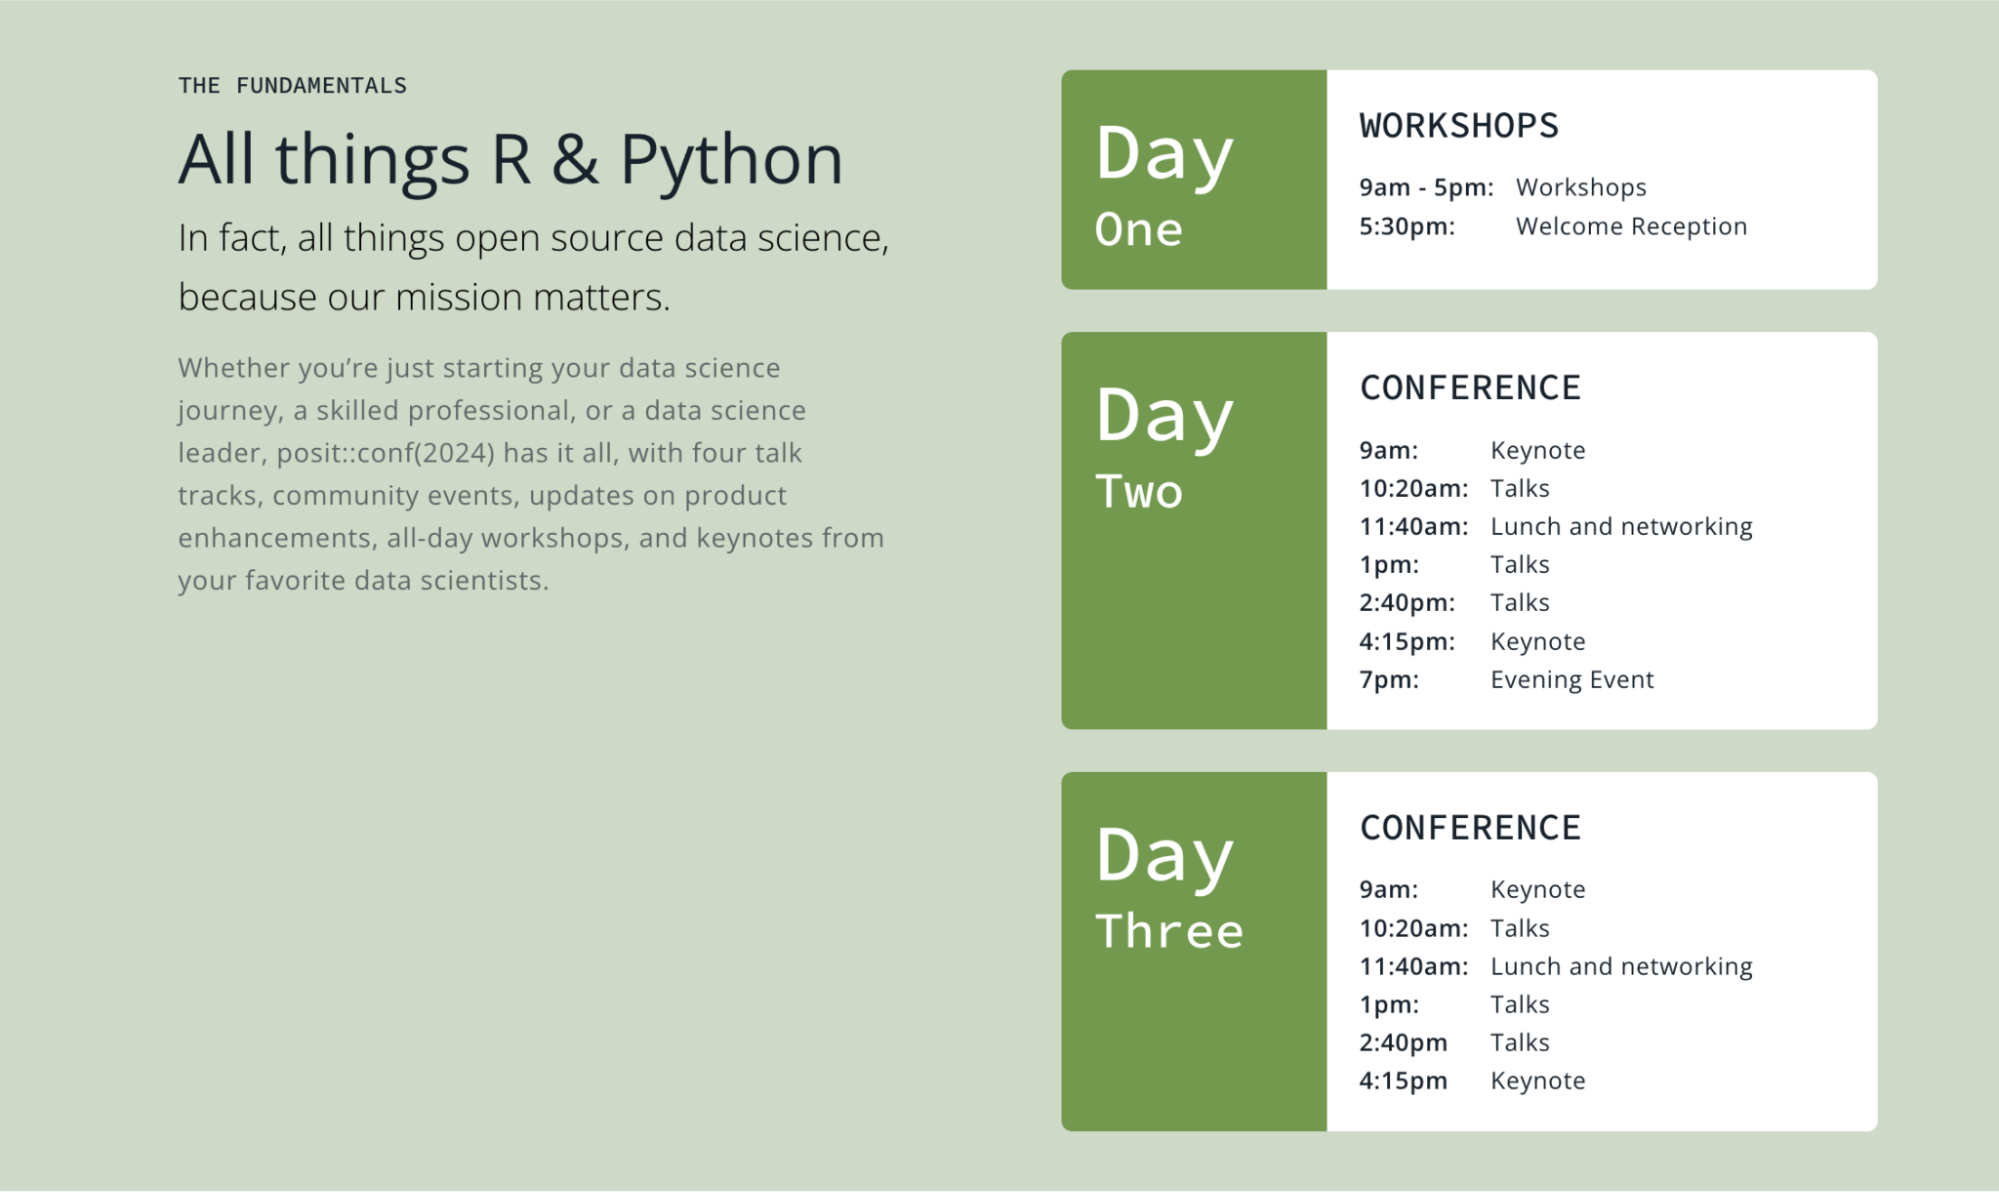 Snapshot of the posit::conf(2024) agenda.

The Fundamentals
All things R & Python

In fact, all things open source data science, because our mission matters.

Whether you’re just starting your data science journey, a skilled professional, or a data science leader, posit::conf(2024) has it all, with four talk tracks, community events, updates on product enhancements, all-day workshops, and keynotes from your favorite data scientists.


Day One WORKSHOPS
9am - 5pm: Workshops
5:30pm: Welcome Reception


Day Two CONFERENCE
9am: Keynote
10:20am: Talks
11:40am: Lunch and networking
1pm: Talks
2:40pm: Talks
4:15pm: Keynote
7pm: Evening Event


Day Three CONFERENCE
9am: Keynote
10:20am: Talks
11:40am: Lunch and networking
1pm: Talks
2:40pm Talks
4:15pm Keynote

